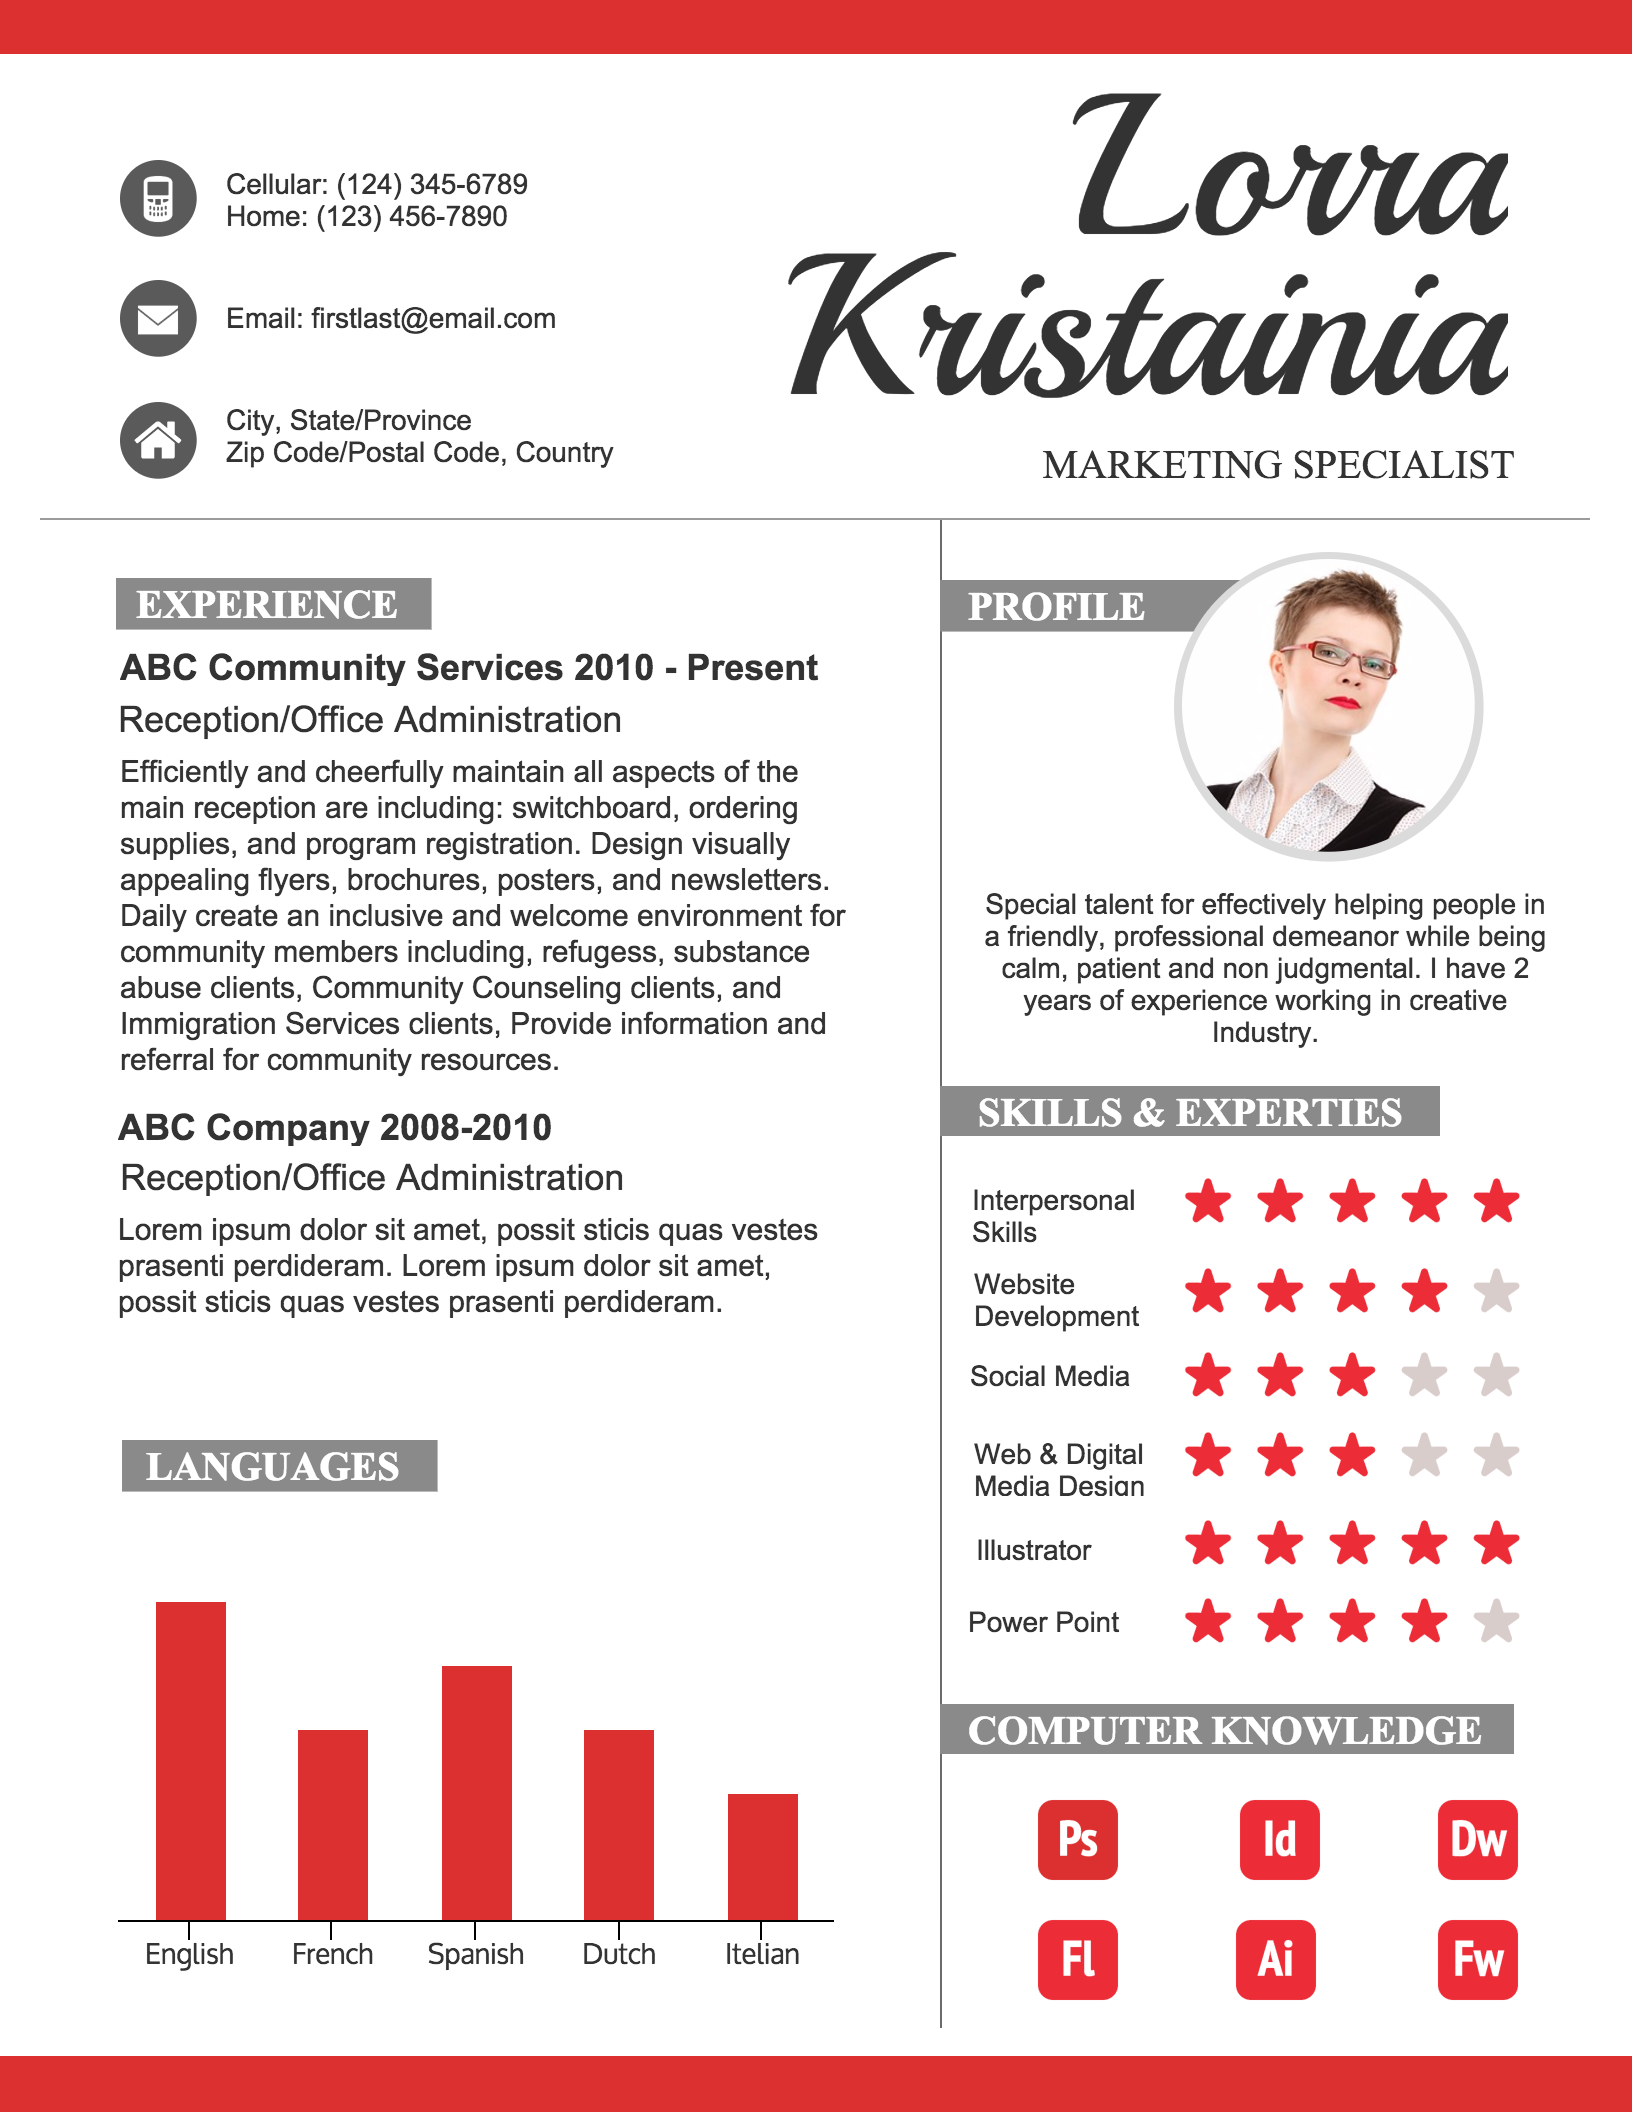 Infographic Resume Templates the Recruiters Will Love - Creately Blog